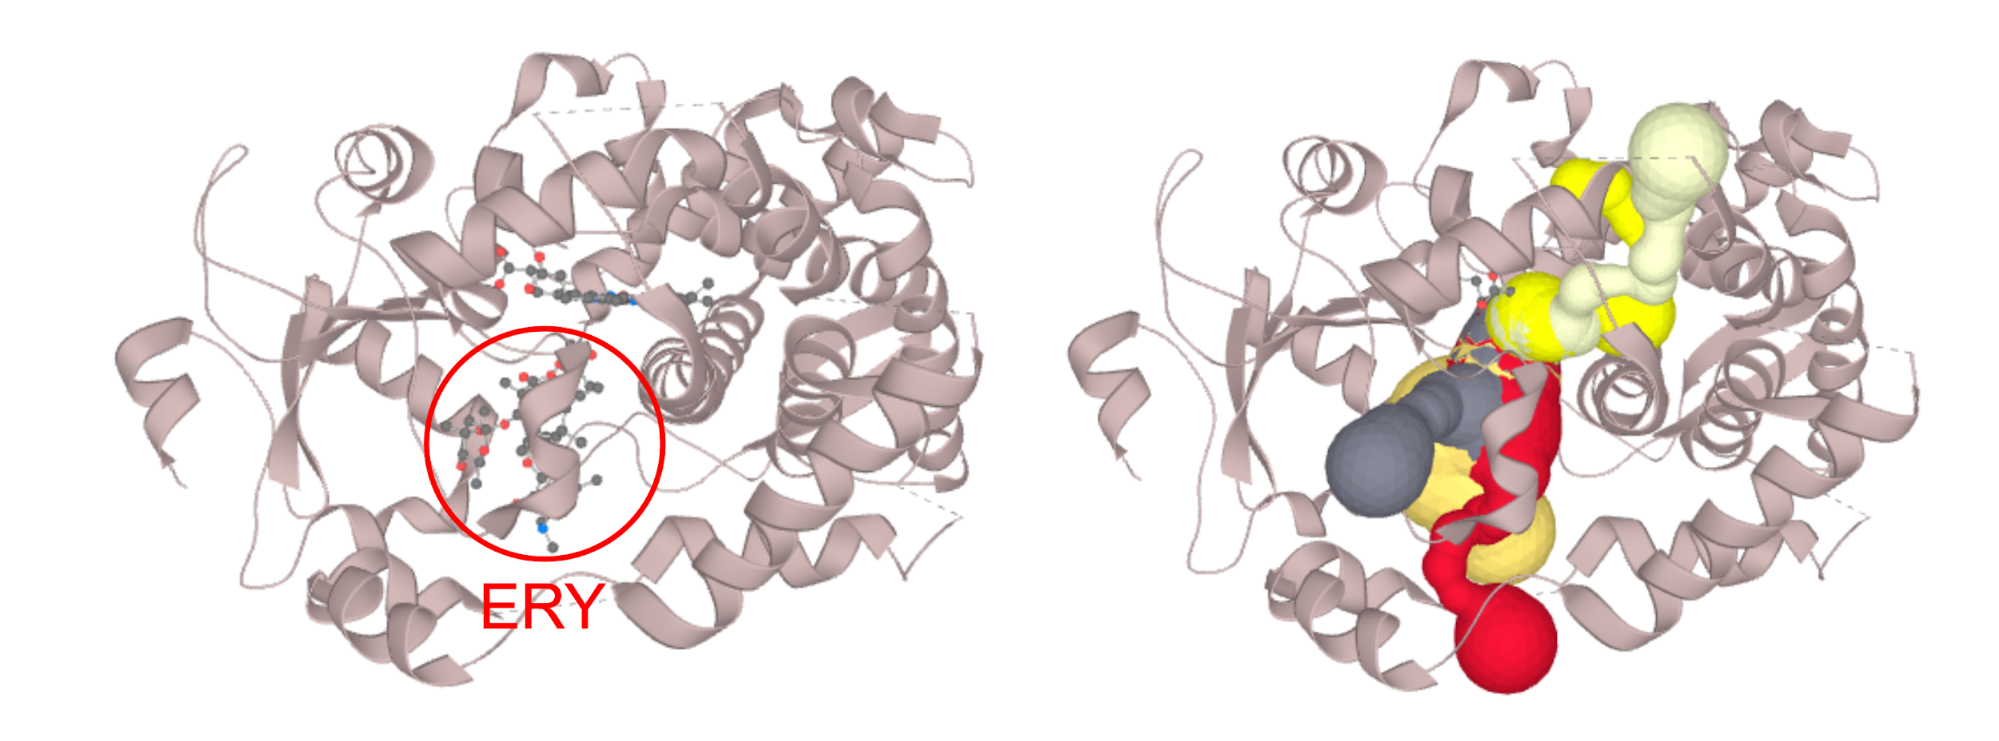 Structure of CYP3A4 with bound erythromycin (PDB ID: 2J0D; left) which is blocking the opening of the access channels. Discarding of the erythromycin molecule allows the proper calculation of access channels (right).